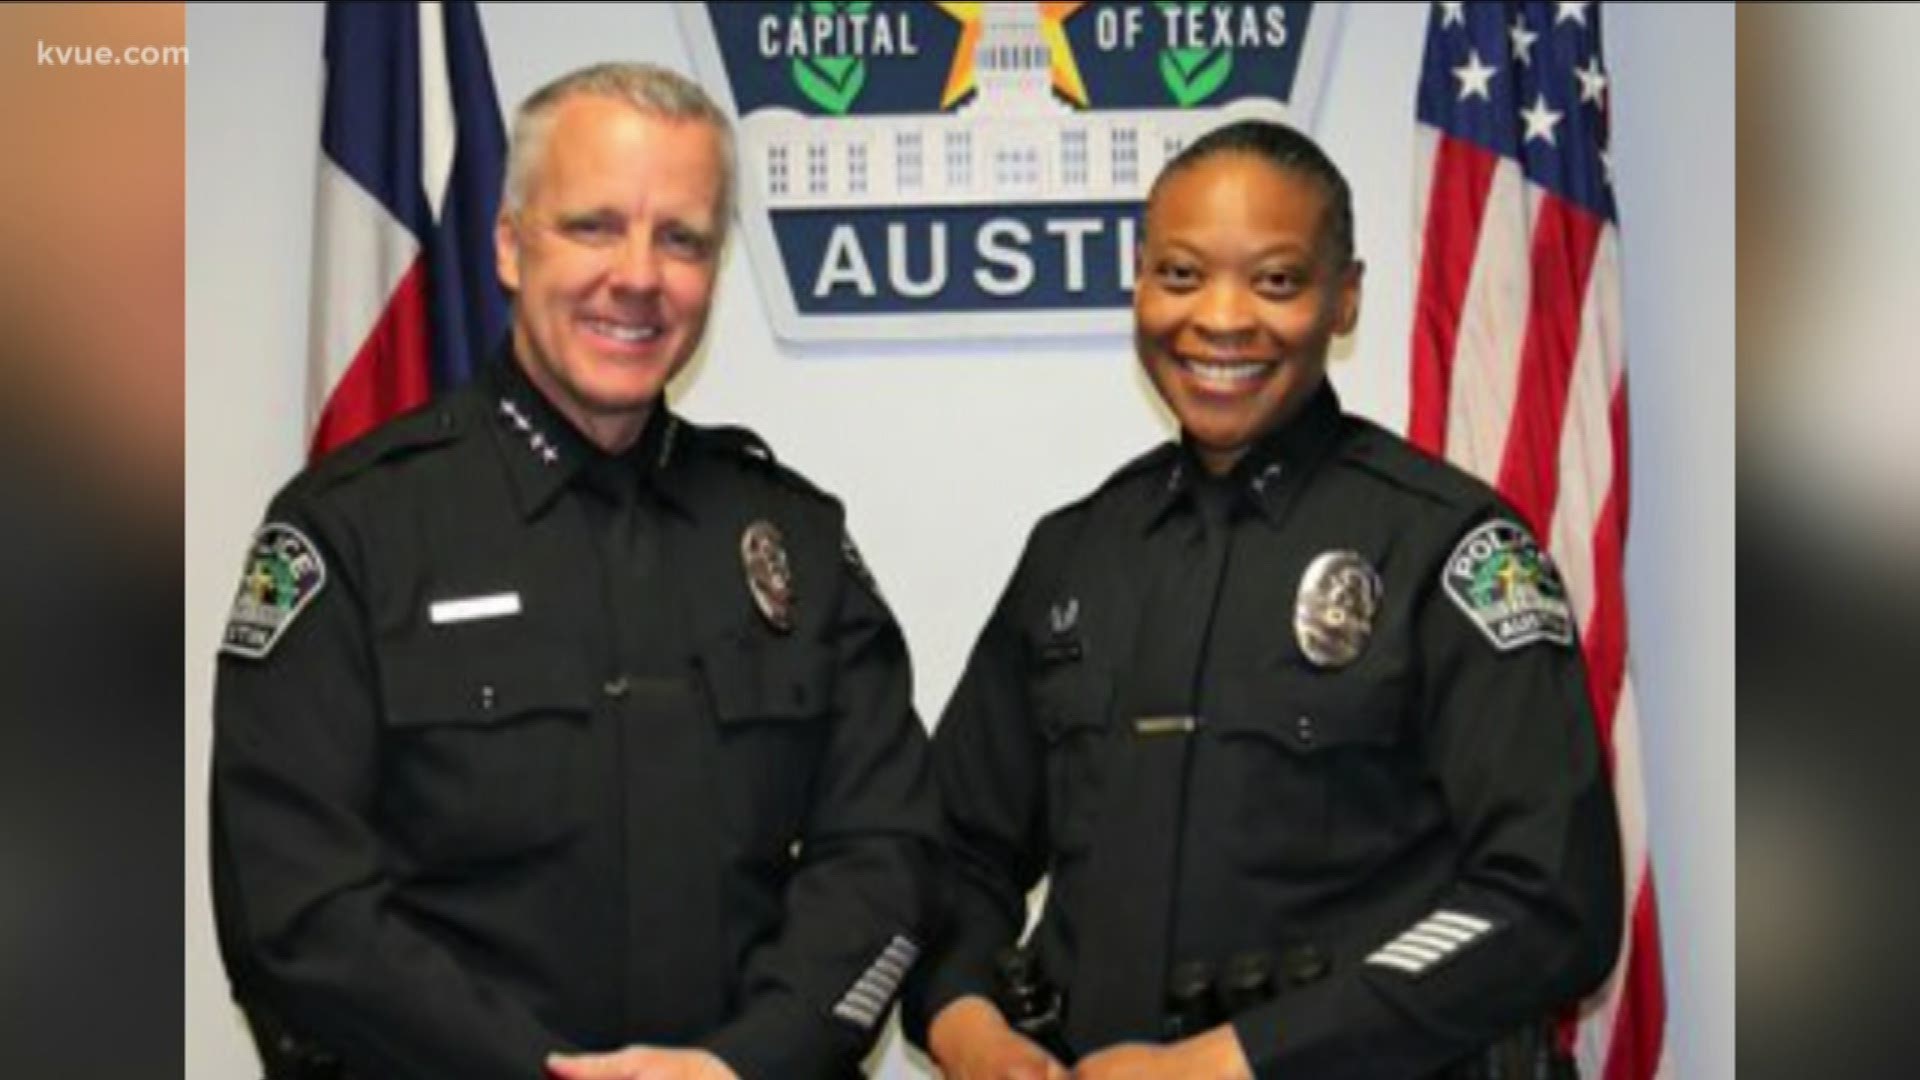 The Austin Police Department has a new assistant chief.